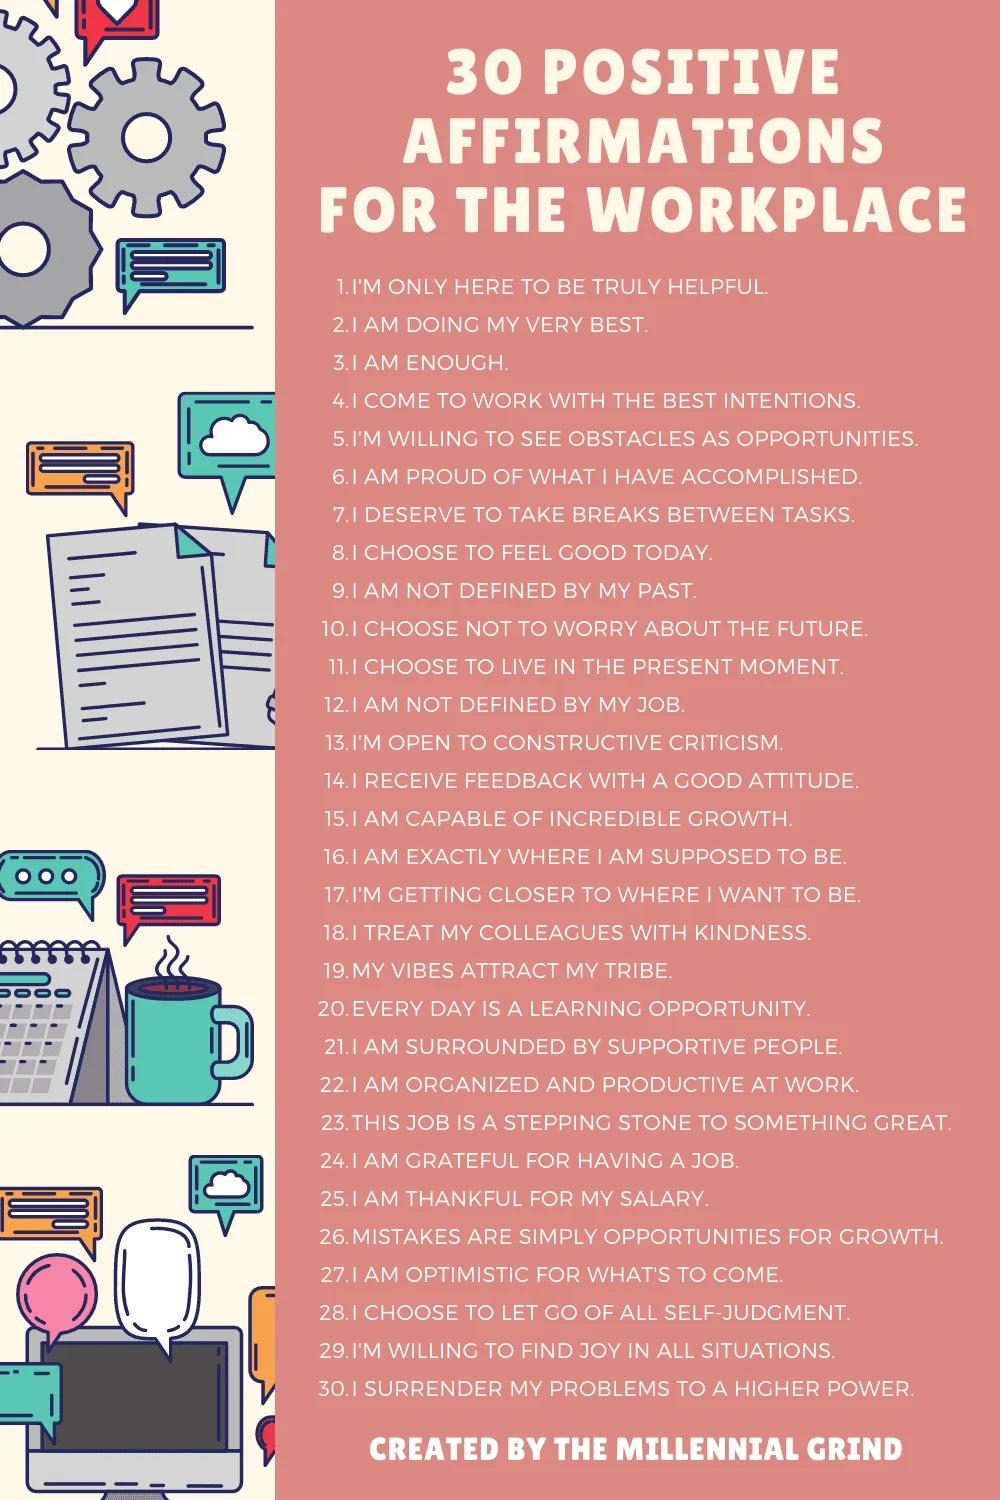 30-positive-affirmations-for-work-stress-relief-the-millennial-grind